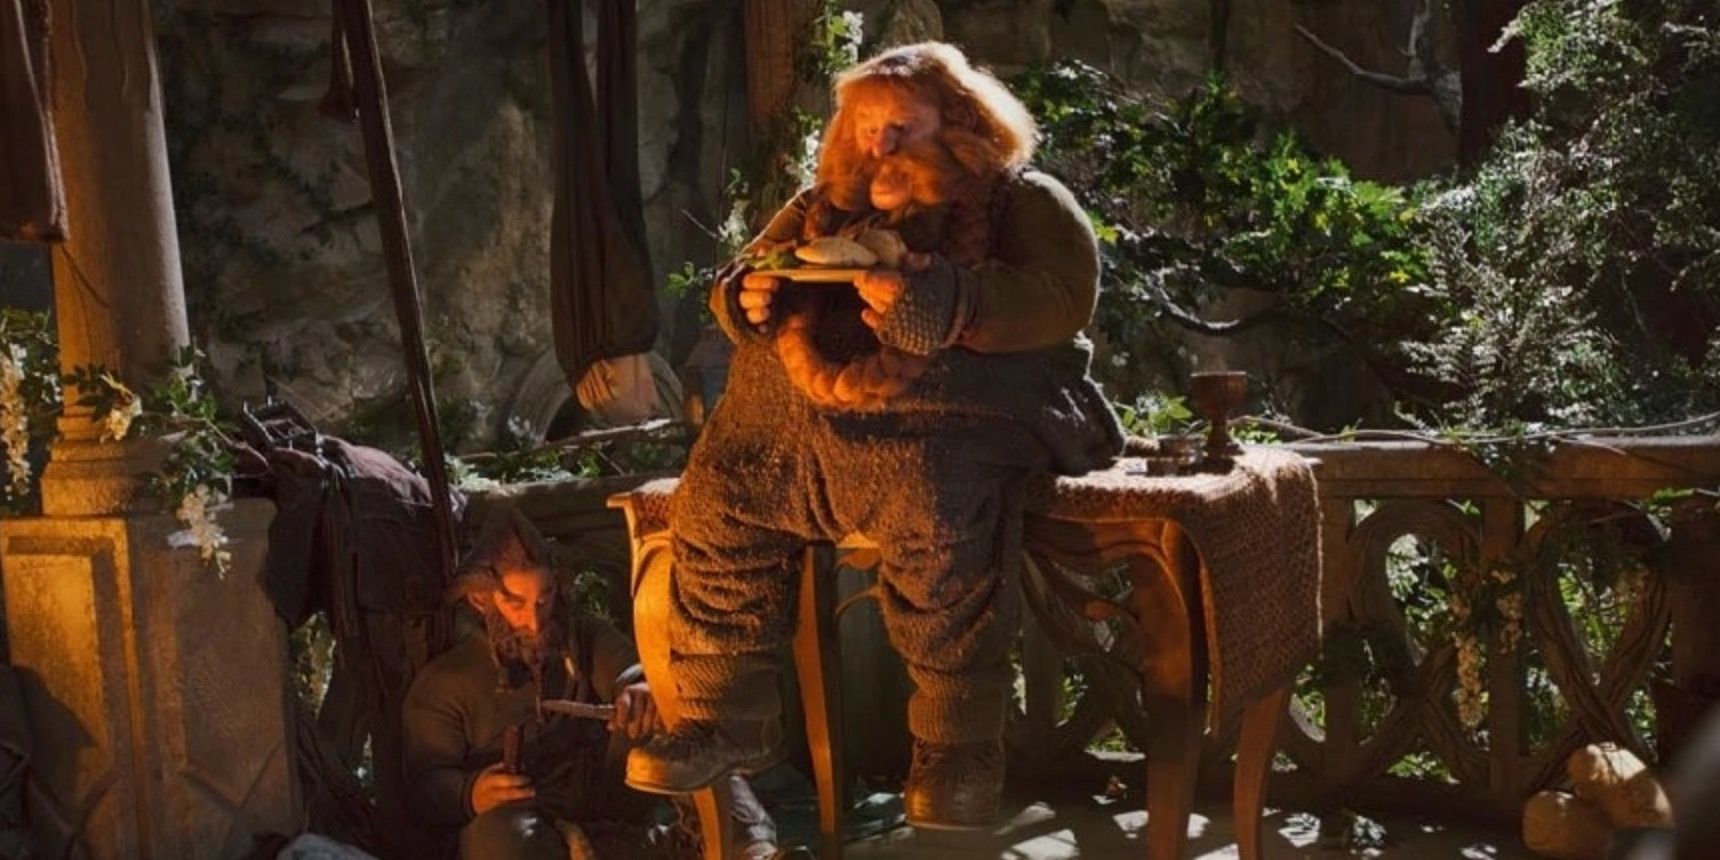 Bombur from The Hobbit movies sitting on a bench.